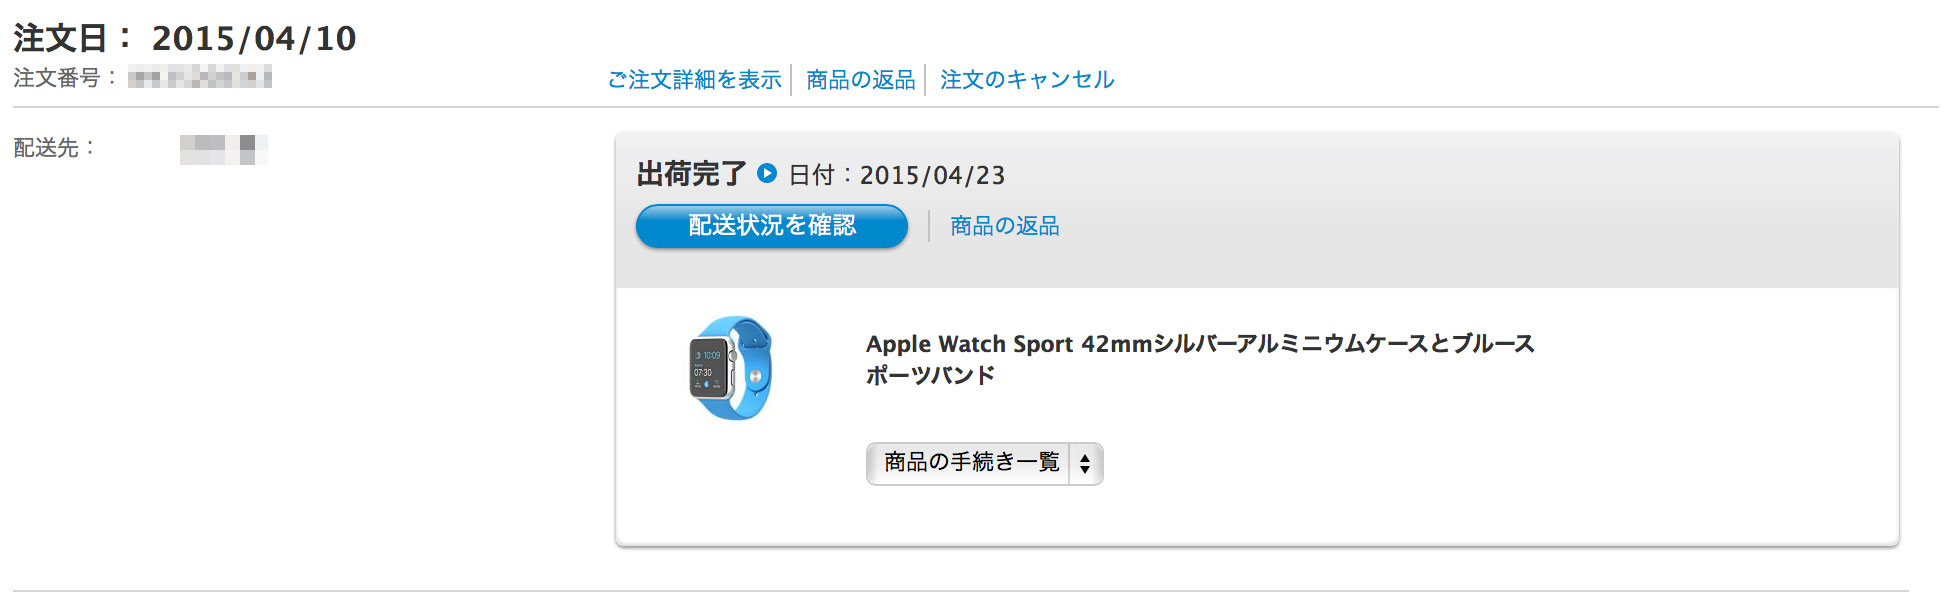 apple watch order status now delivered